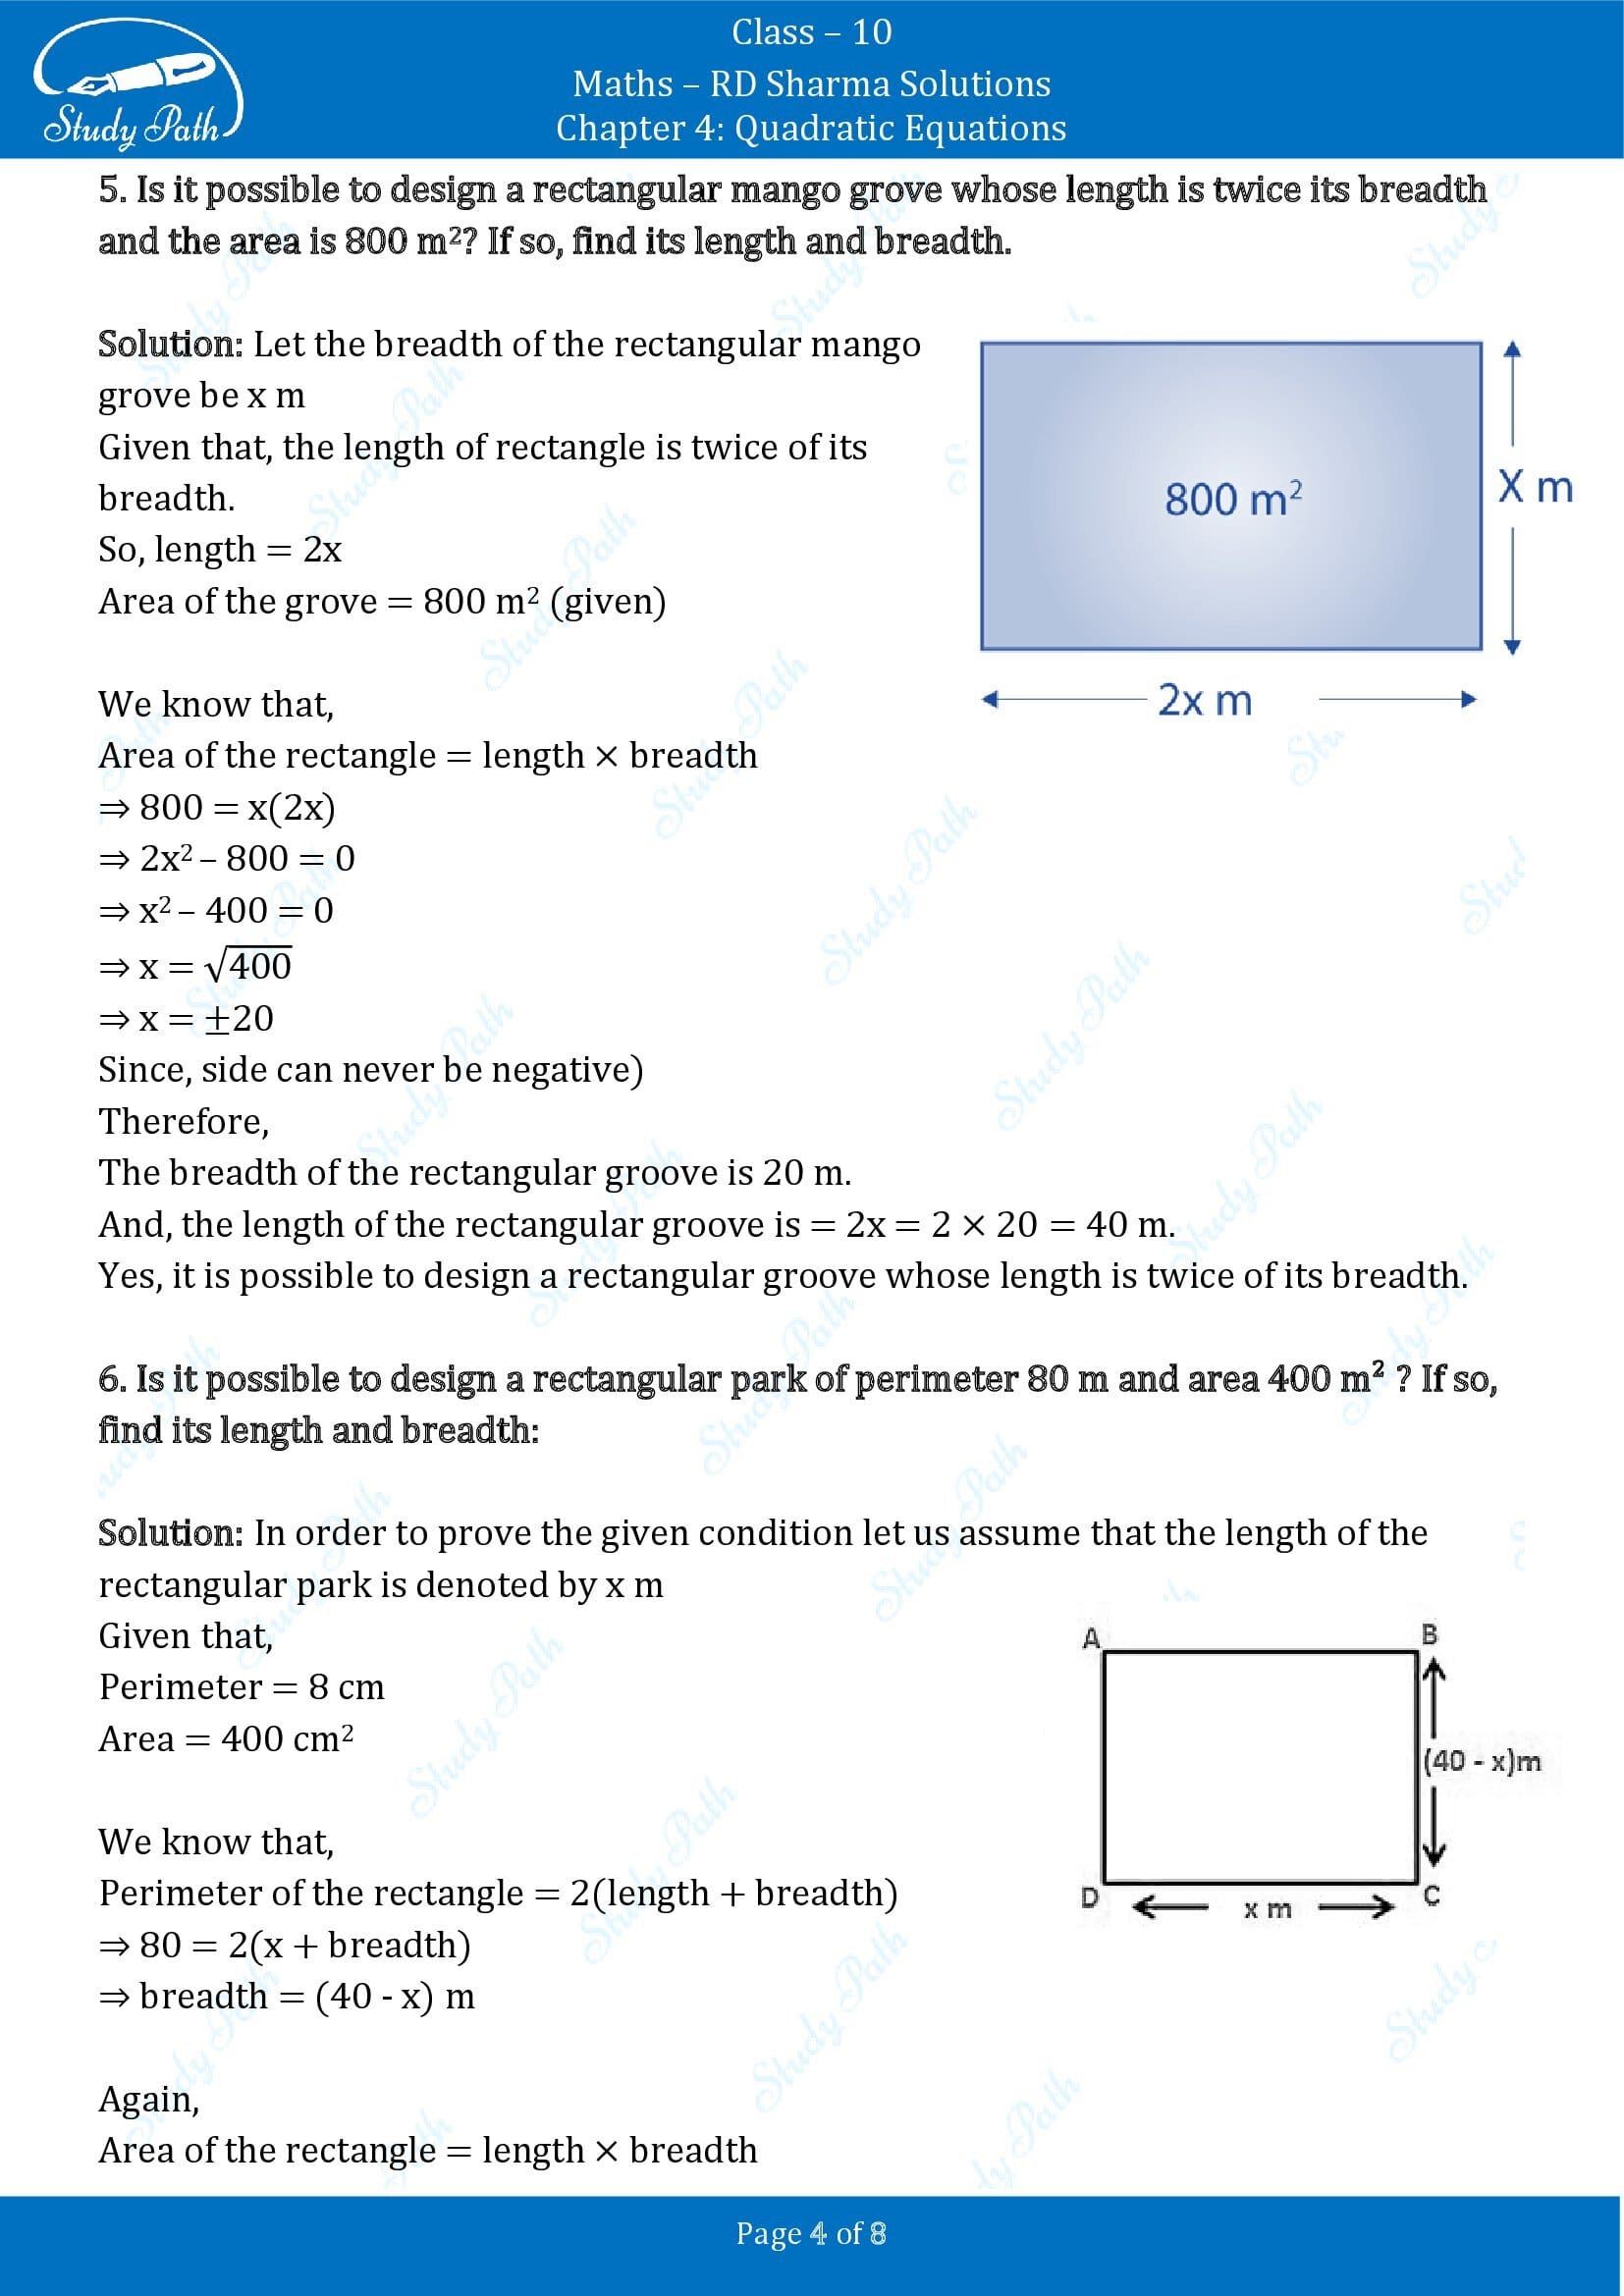 RD Sharma Solutions Class 10 Chapter 4 Quadratic Equations Exercise 4.11 00004